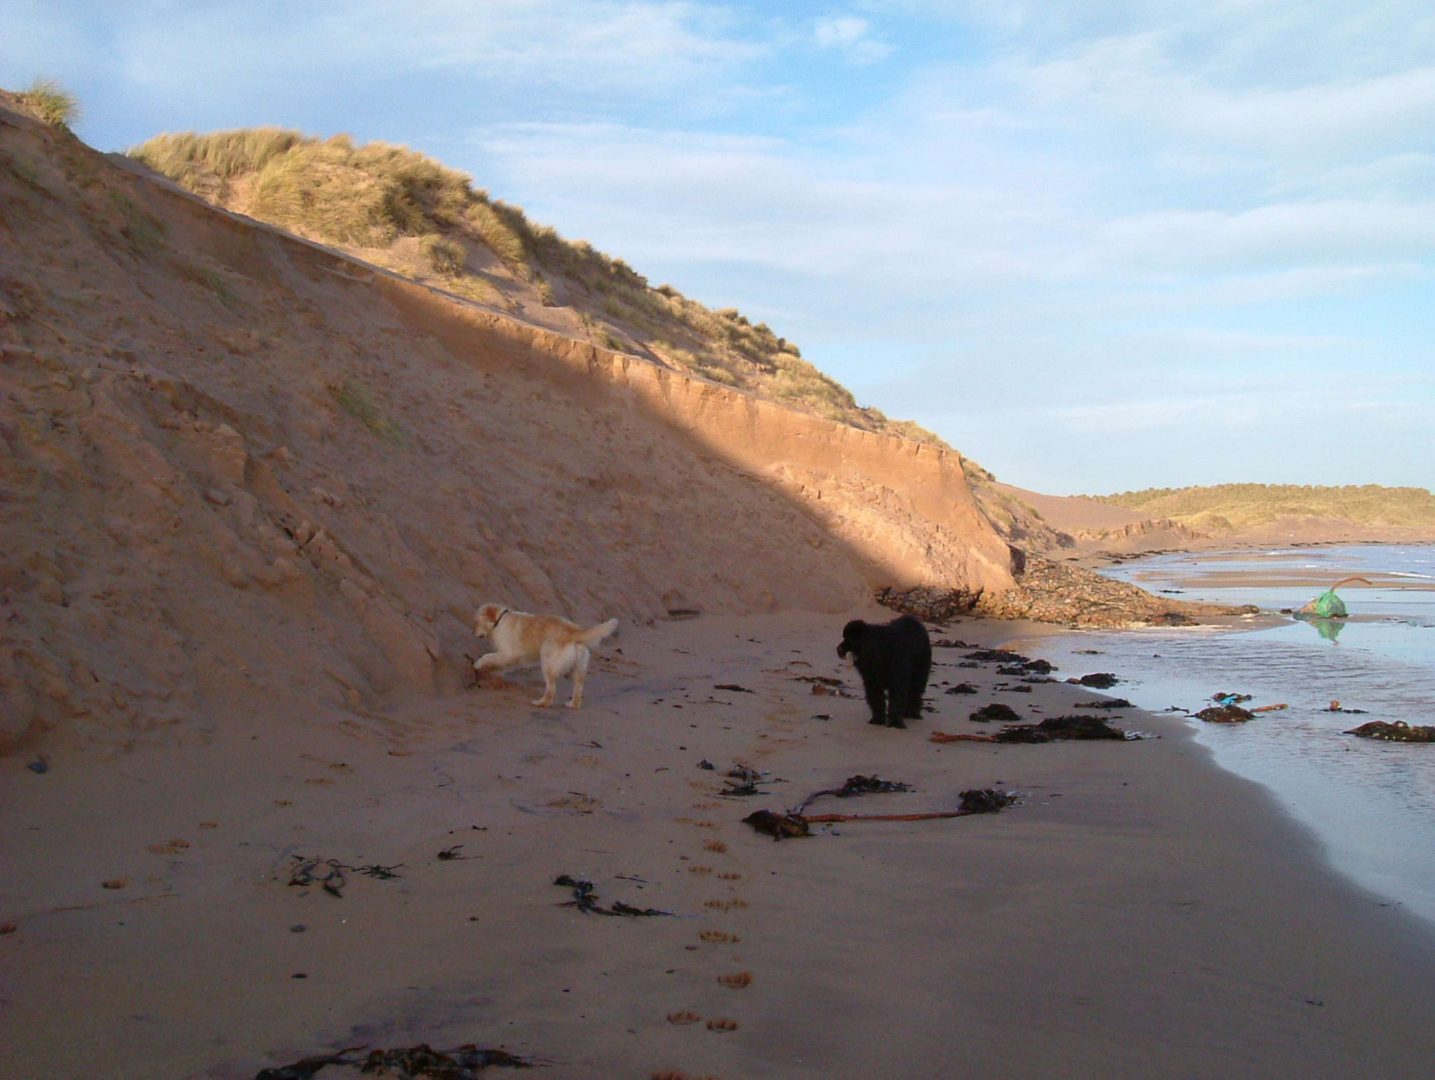 Dogs on a beach holiday